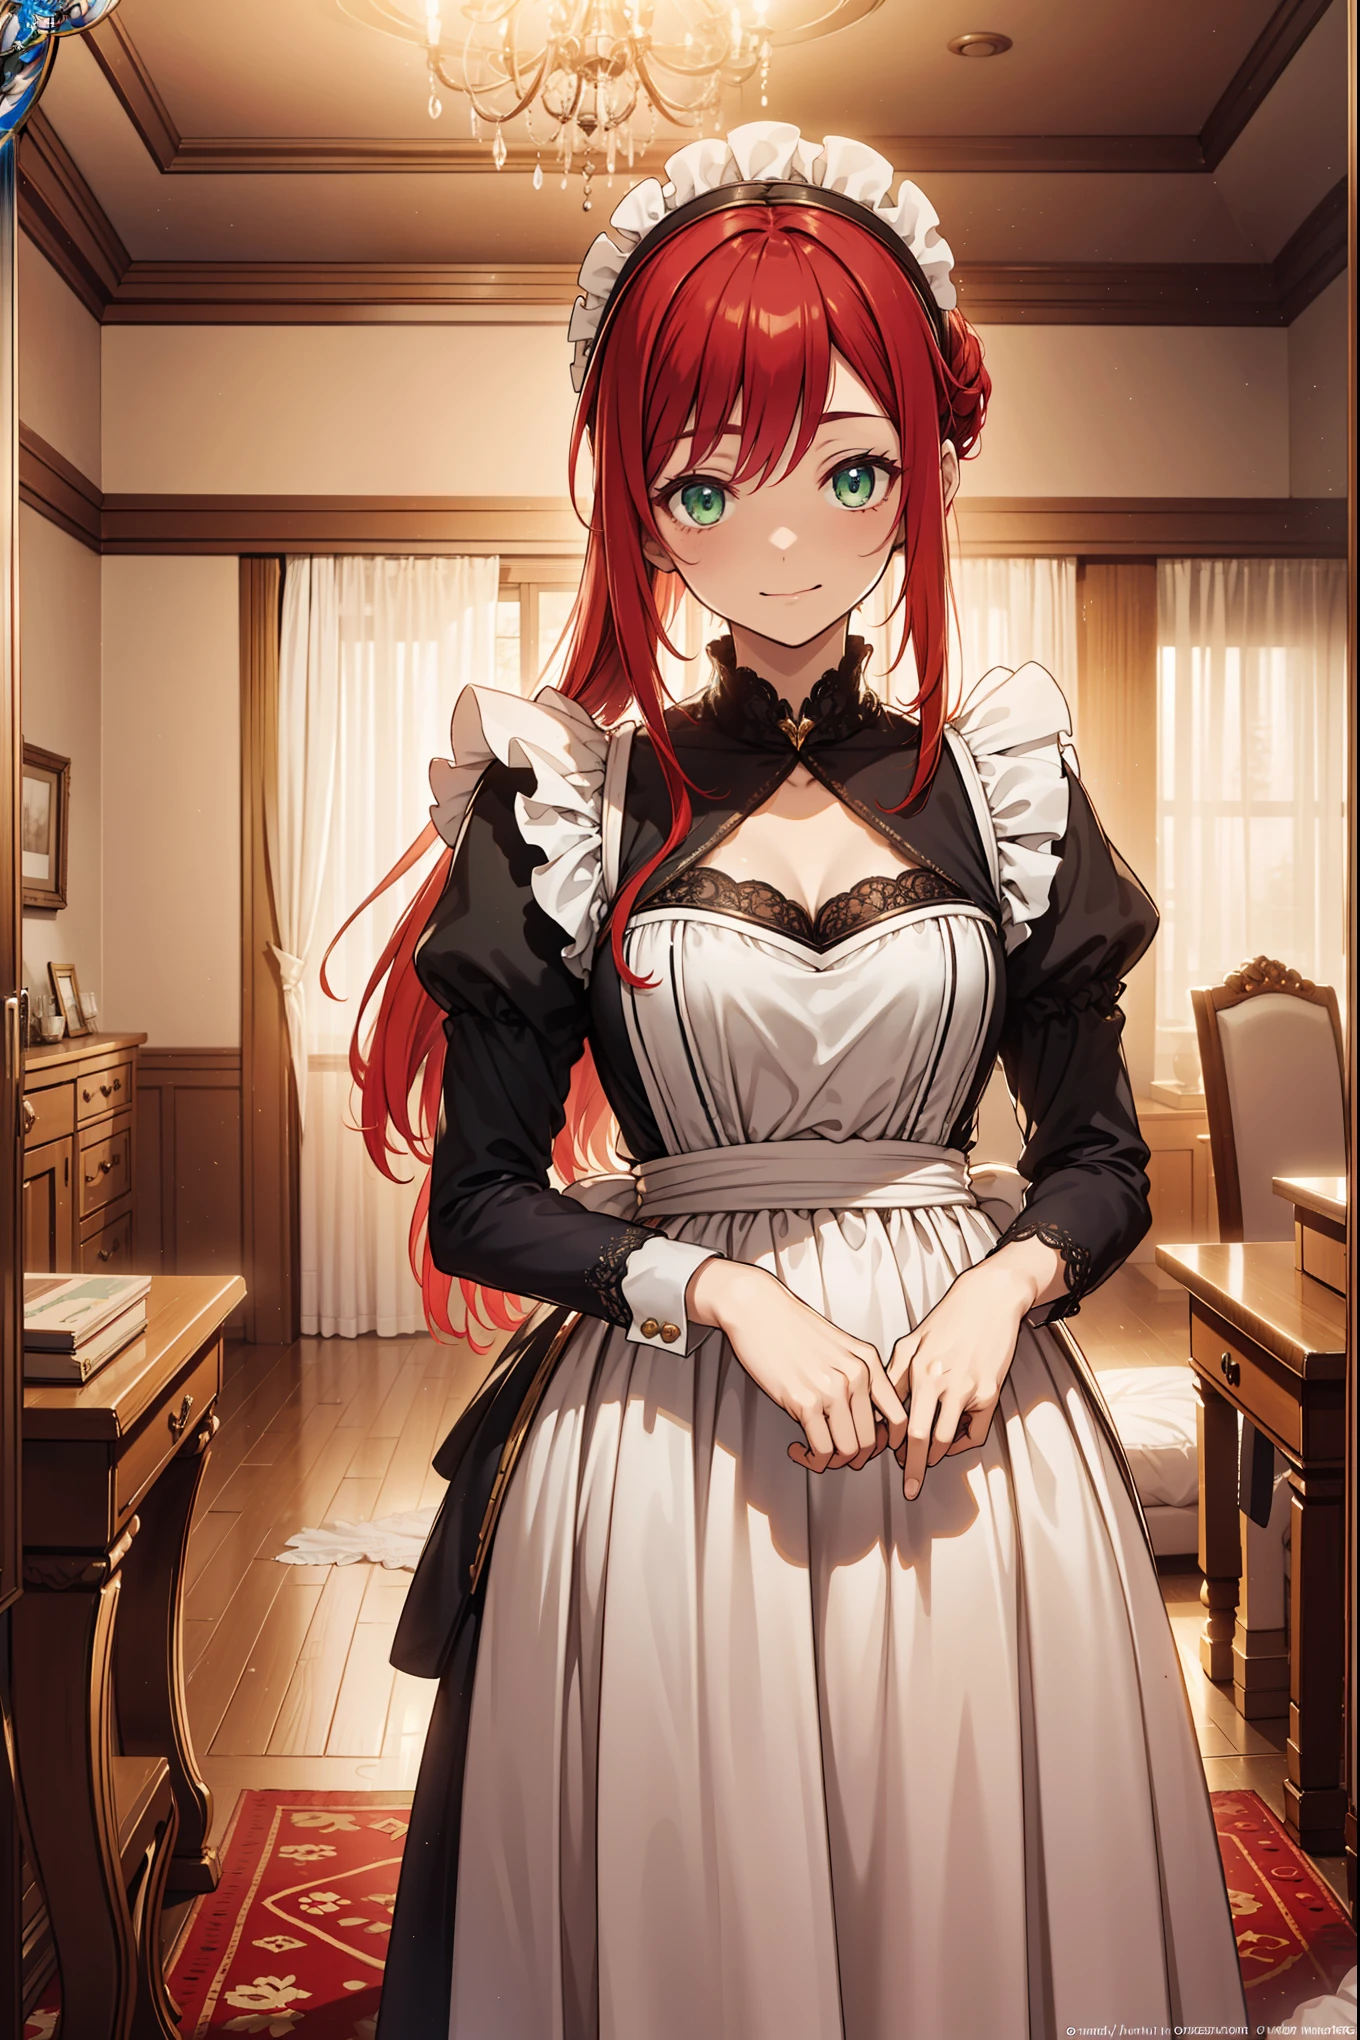 (Best quality, A high resolution, Textured skin, High quality, High details, High details,Extremely detailed CG unity), Enchanted，having fun，Being in love，housekeeper in fantasy world, crimson red hair, green eyes, exquisite costumes，solo person，long elegant dress, A small amount of lace，Dazzle, woman, beautiful, (maid), (house keeper), (in grand home), (luxurious house), house keeper female, more details, detailed home scene, home detailed